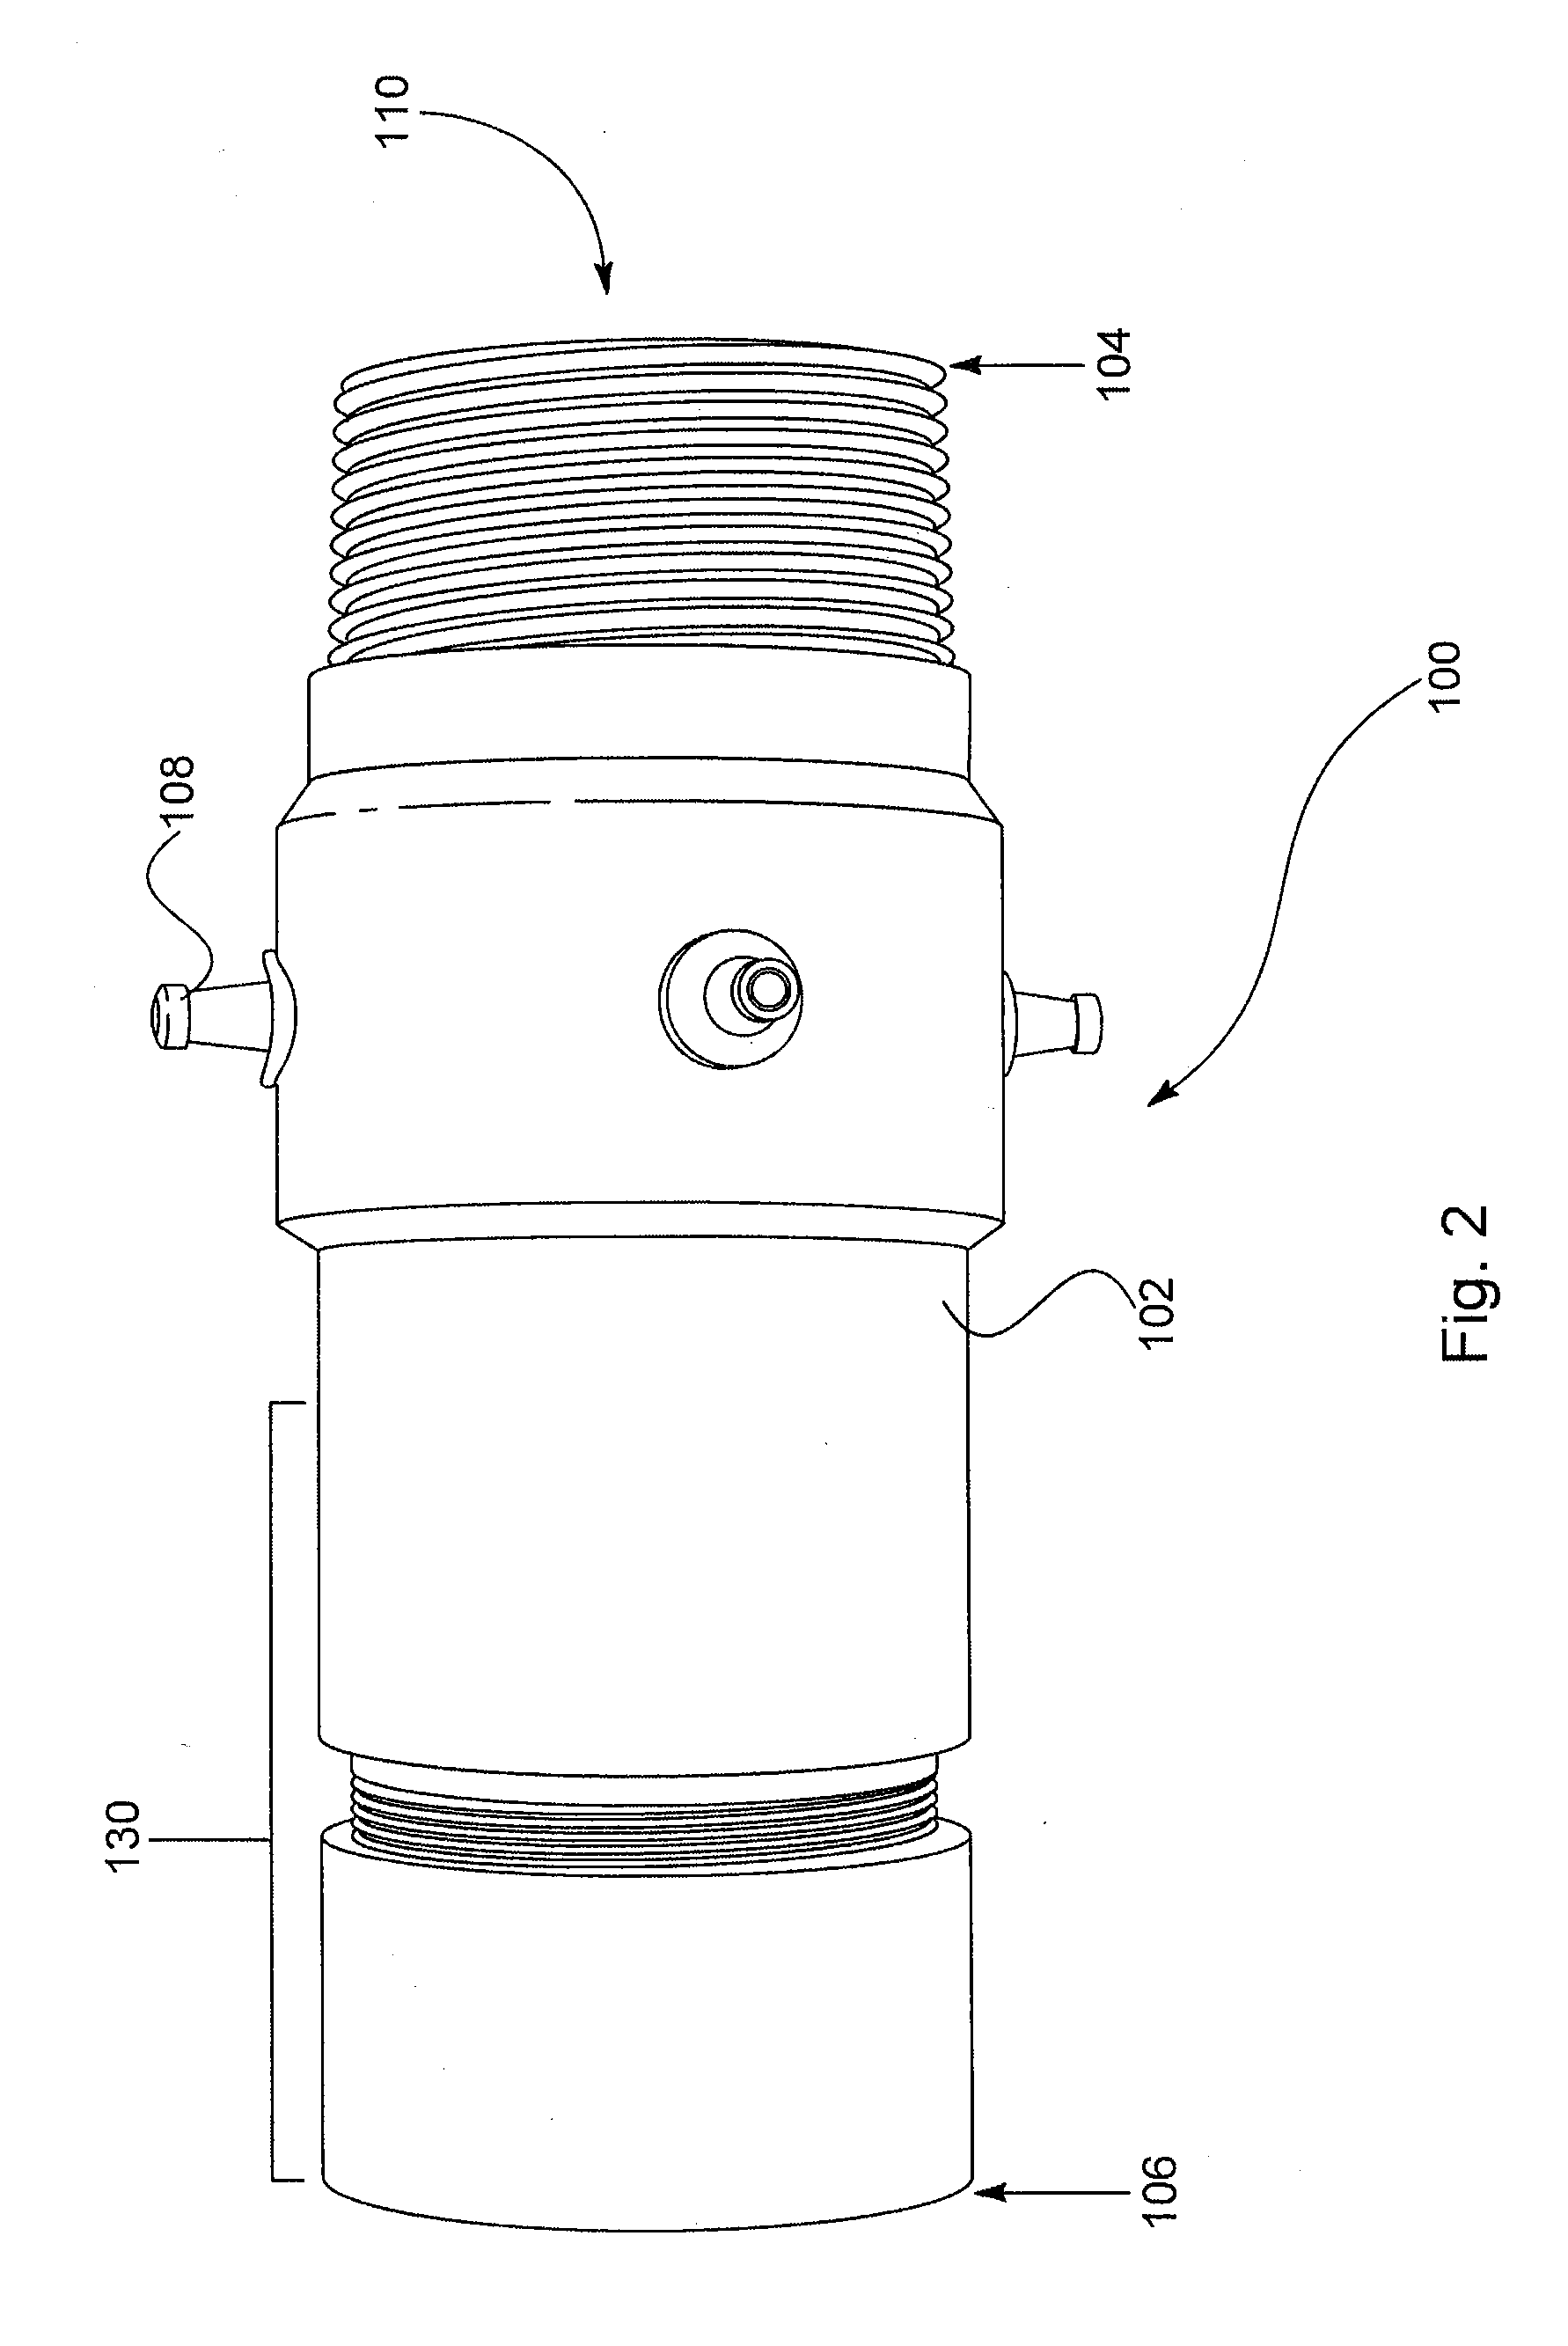 Systems and methods for producing ozonated water on demand